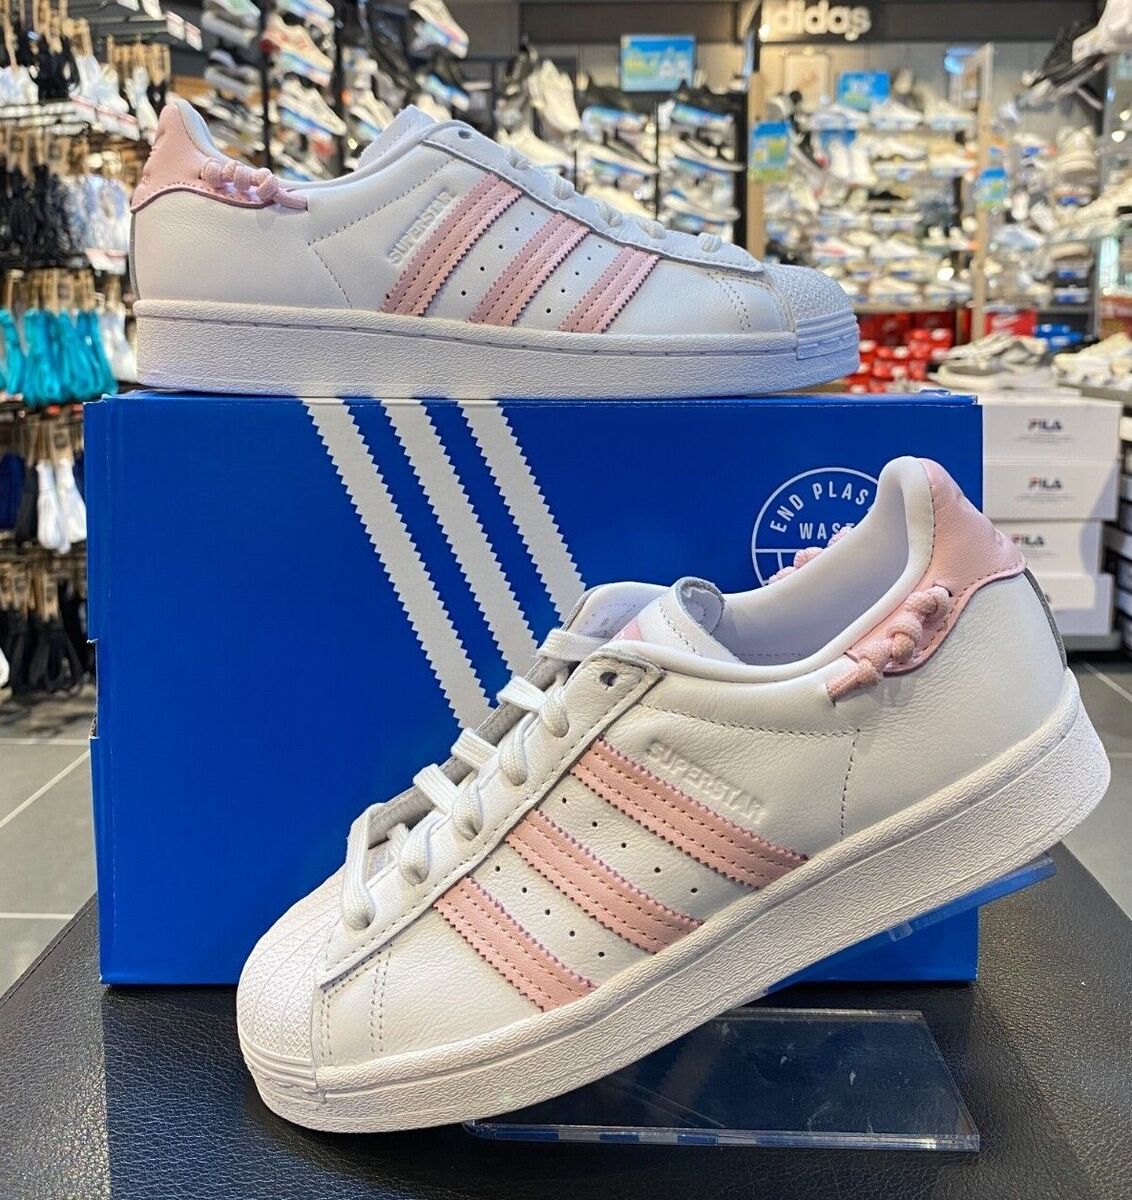 Contando insectos Artístico Sensible Adidas Superstar White Clear Pink Women&#039;s Sizes $100 NEW Shoes  Sneakers GZ3446 | eBay